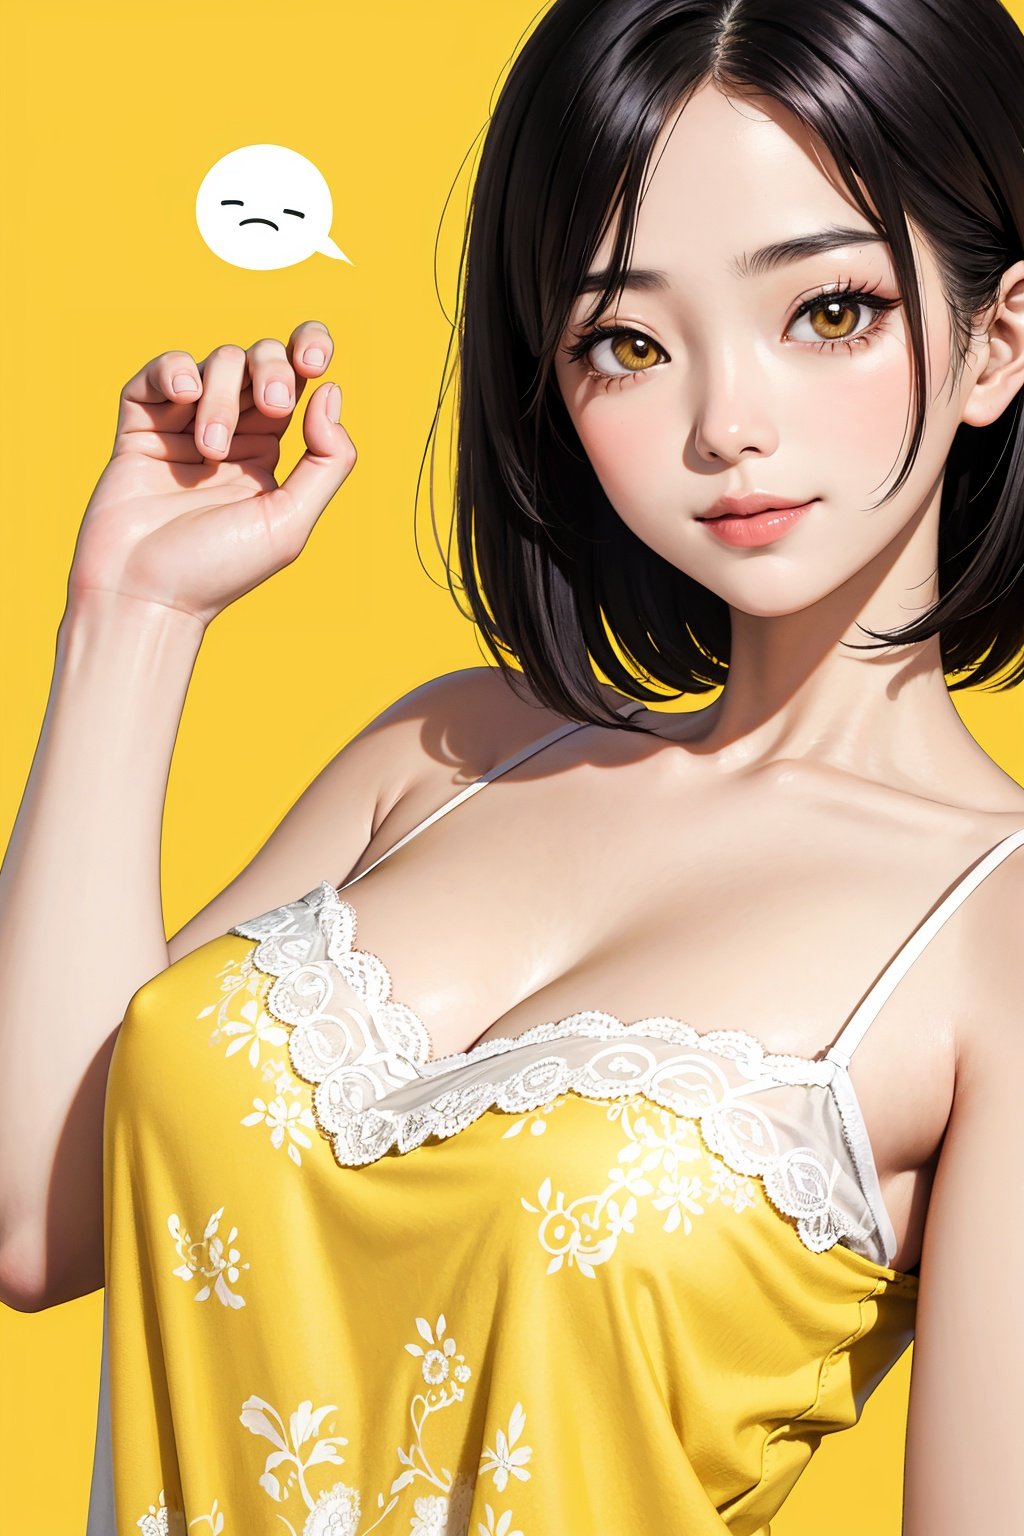 asian woman, medium hair, close-up, smile, (white lace camisole), (yellow background)